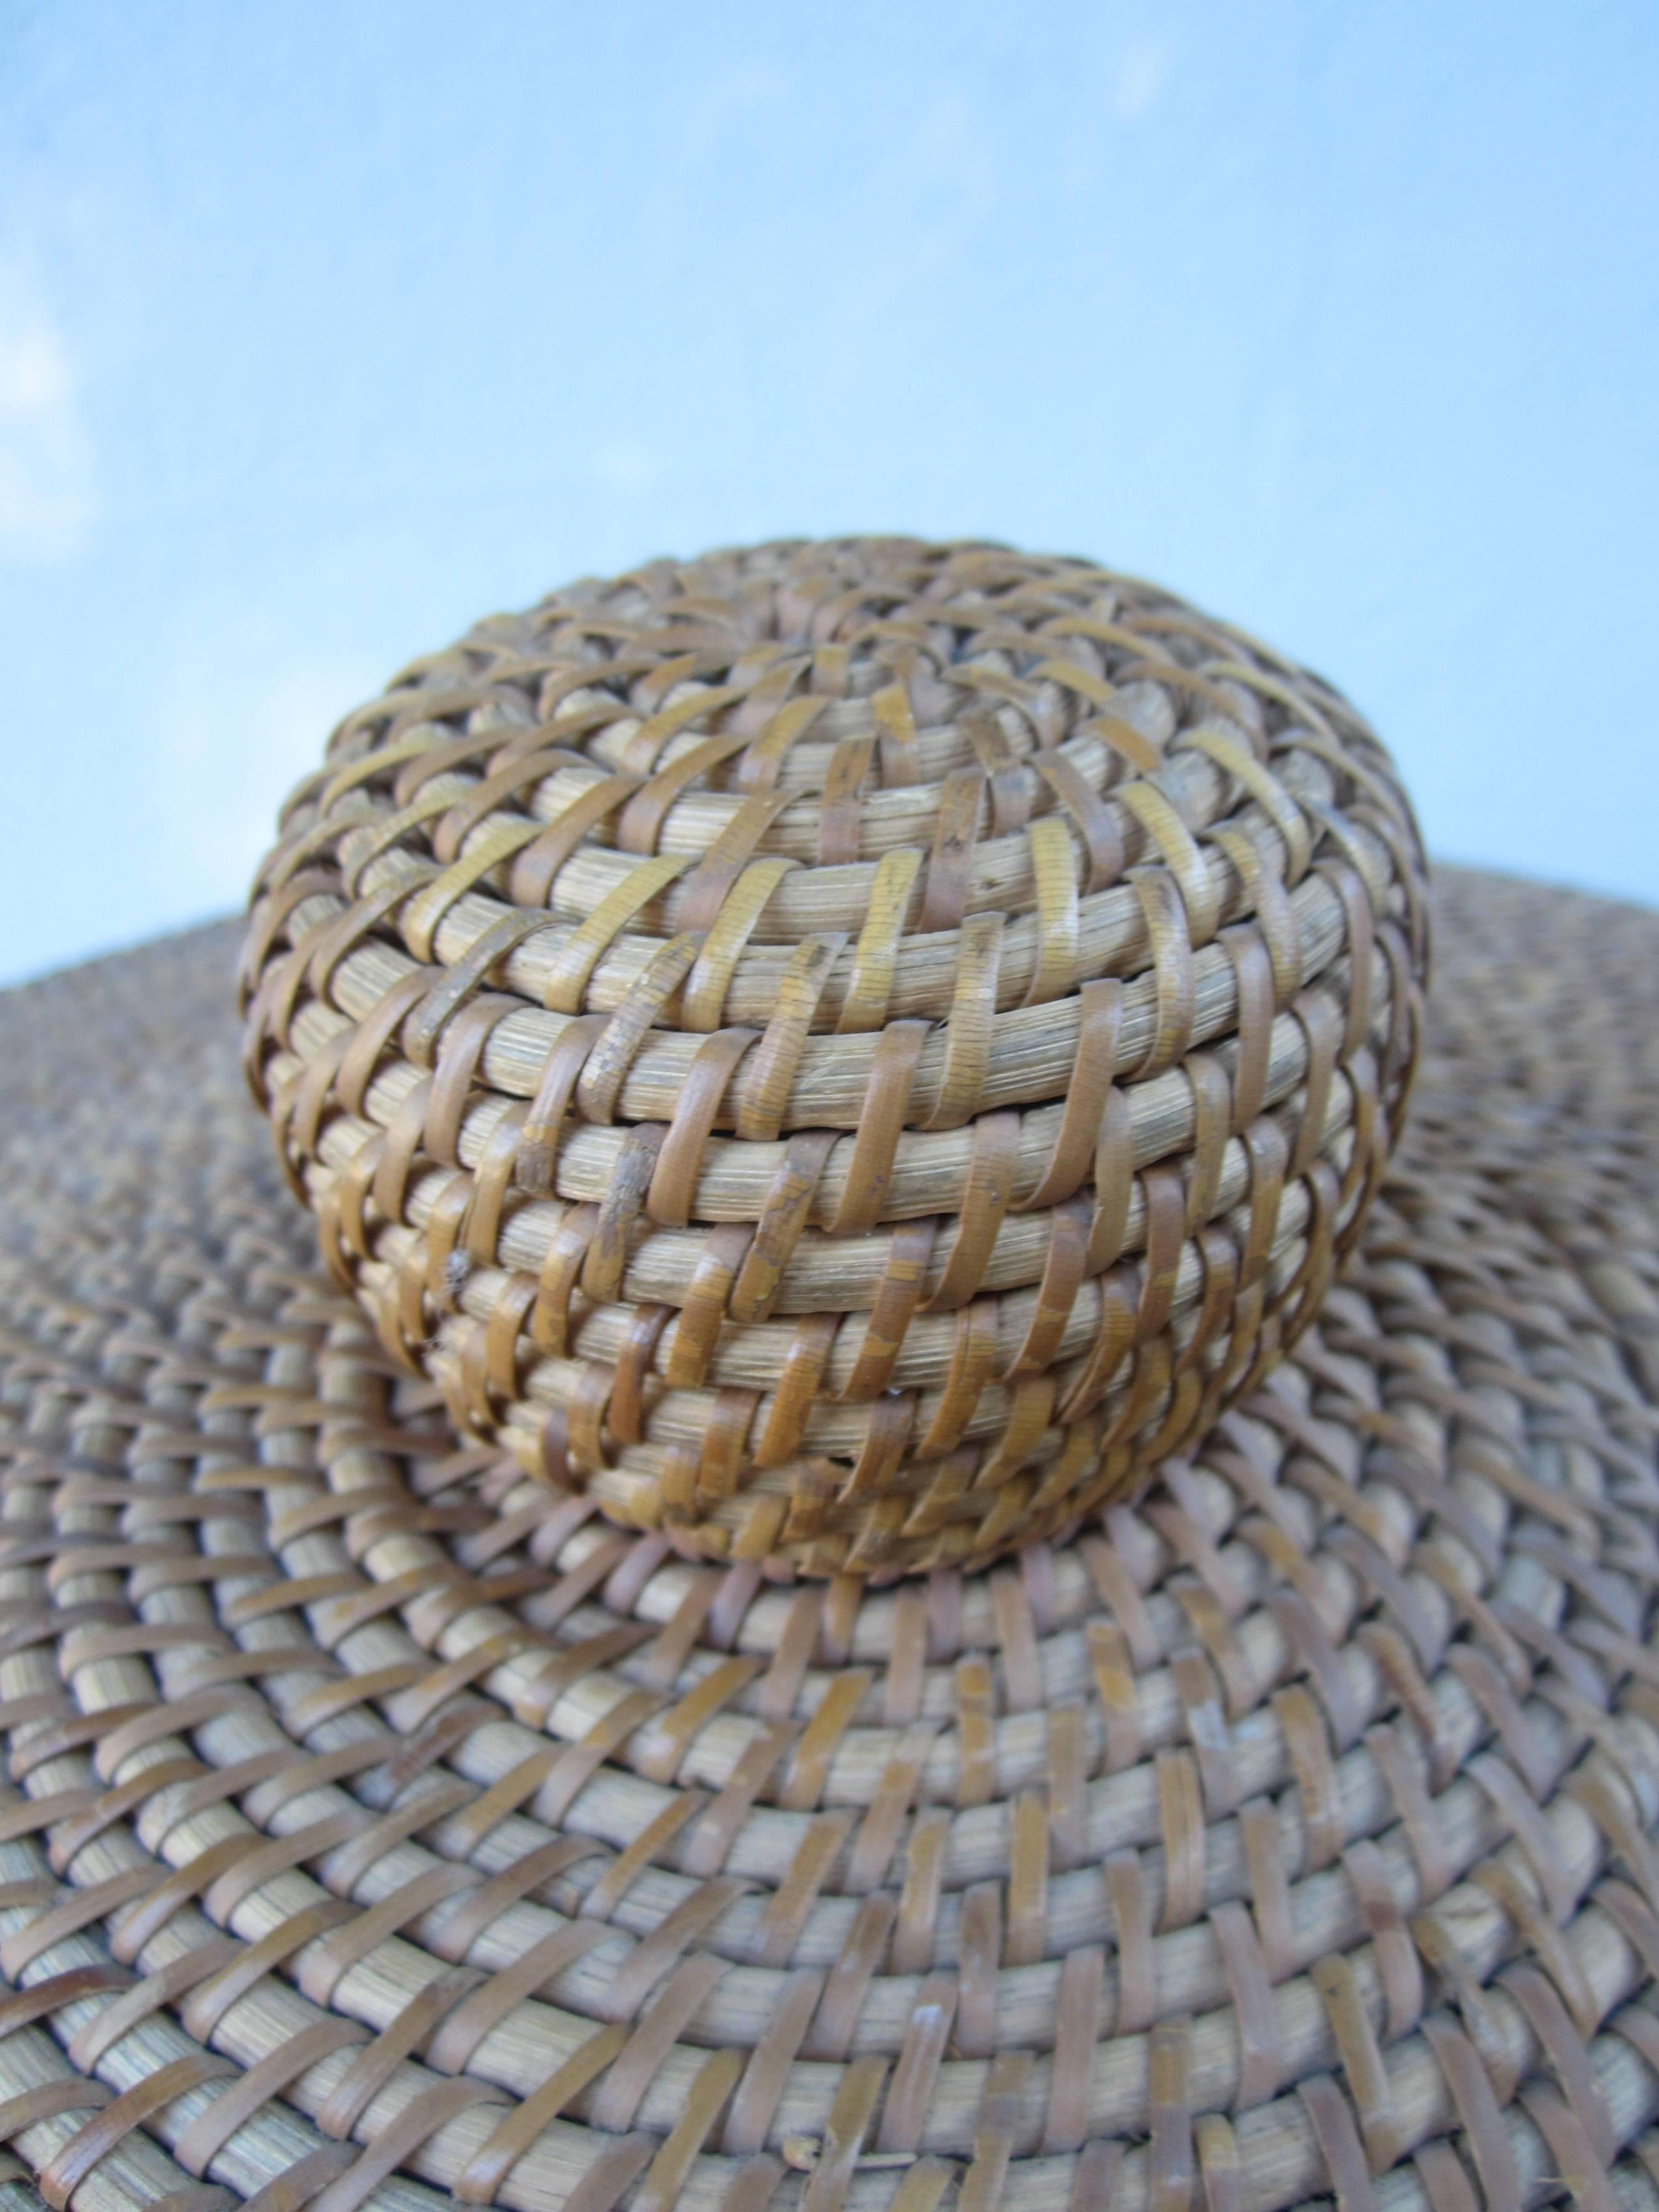 Tremendous and stylish woven basket with a lid.